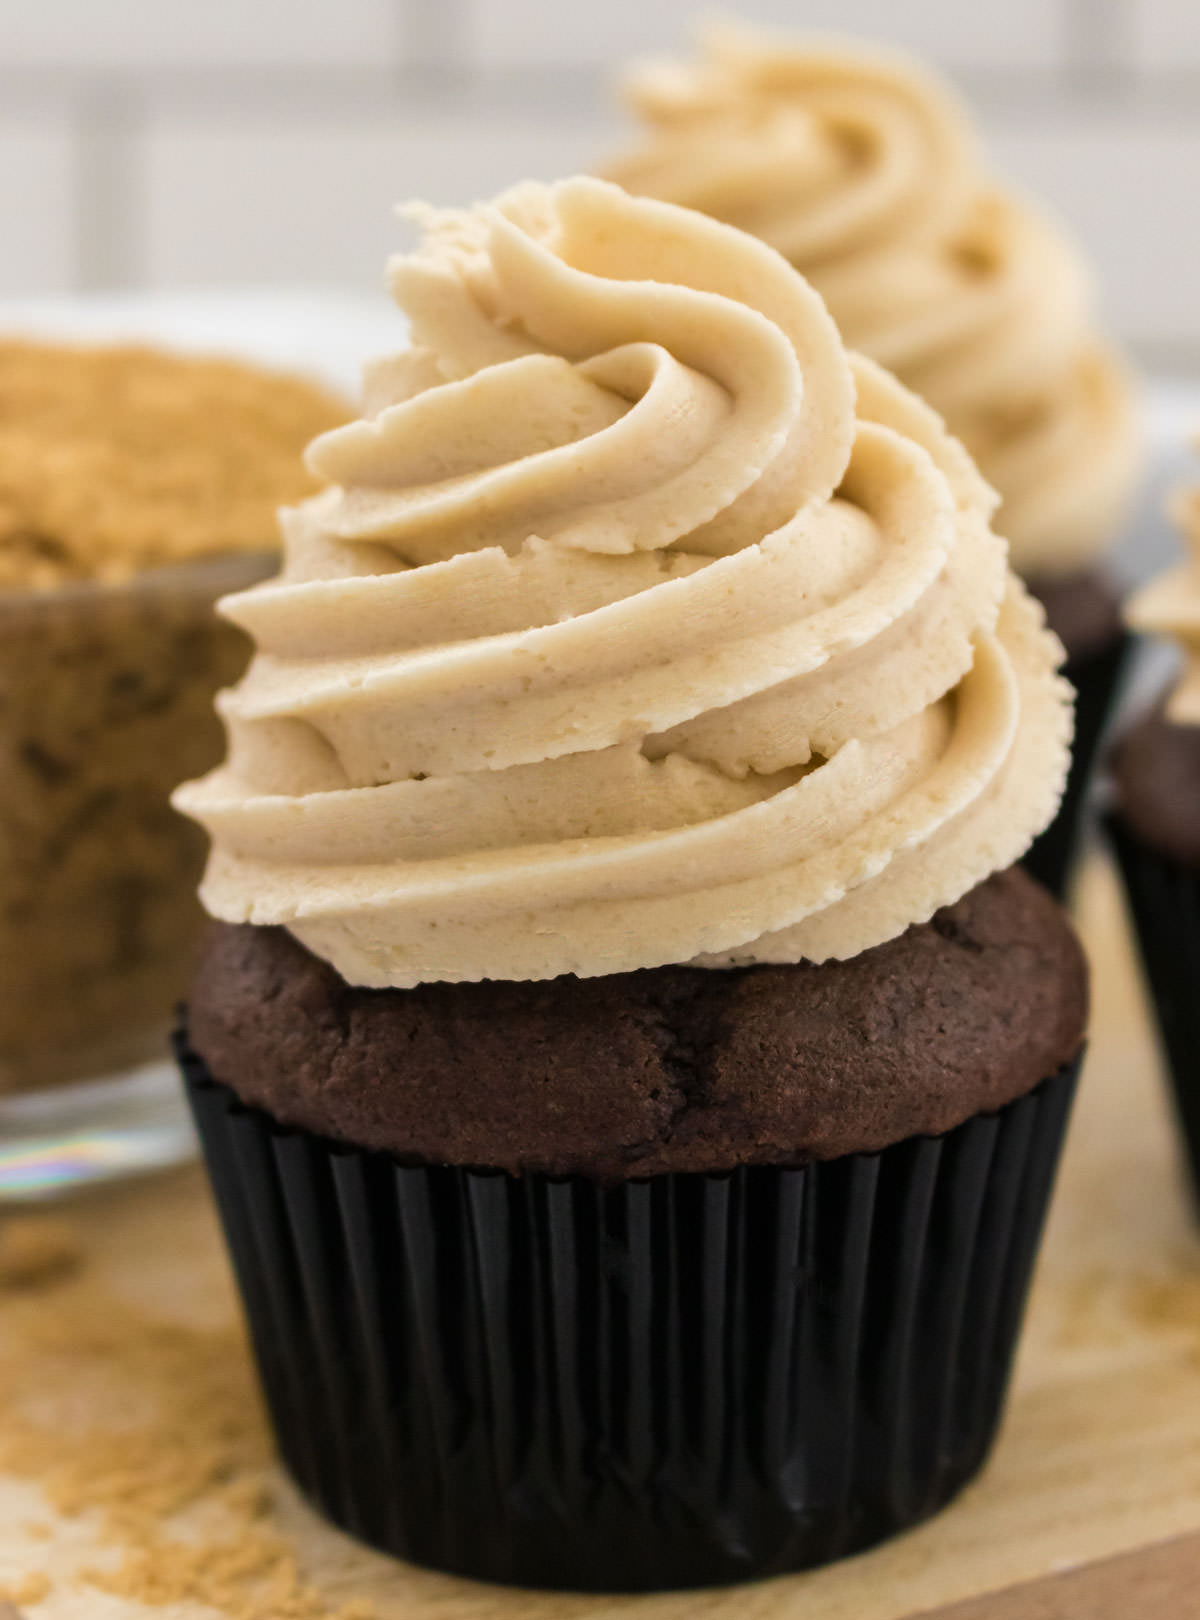 Closeup on a chocolate cupcake topped with The Best Brown Sugar Buttercream Frosting sitting on a cutting board next to a glass bowl filled with Brown Sugar.